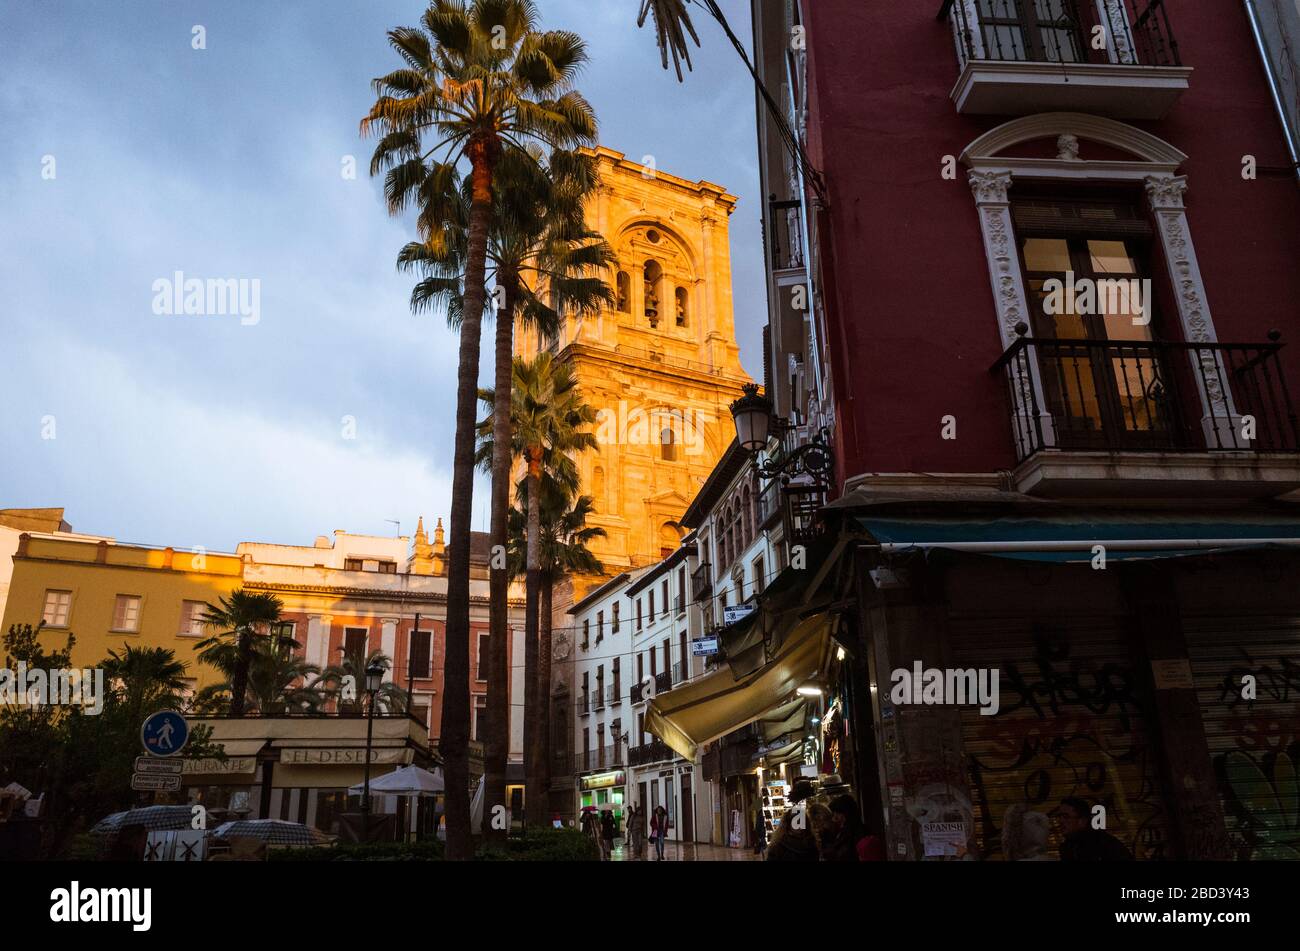 Granada, Spain - December 4th, 2019 : Tower of the cathedral sunlit at dusk. Stock Photo